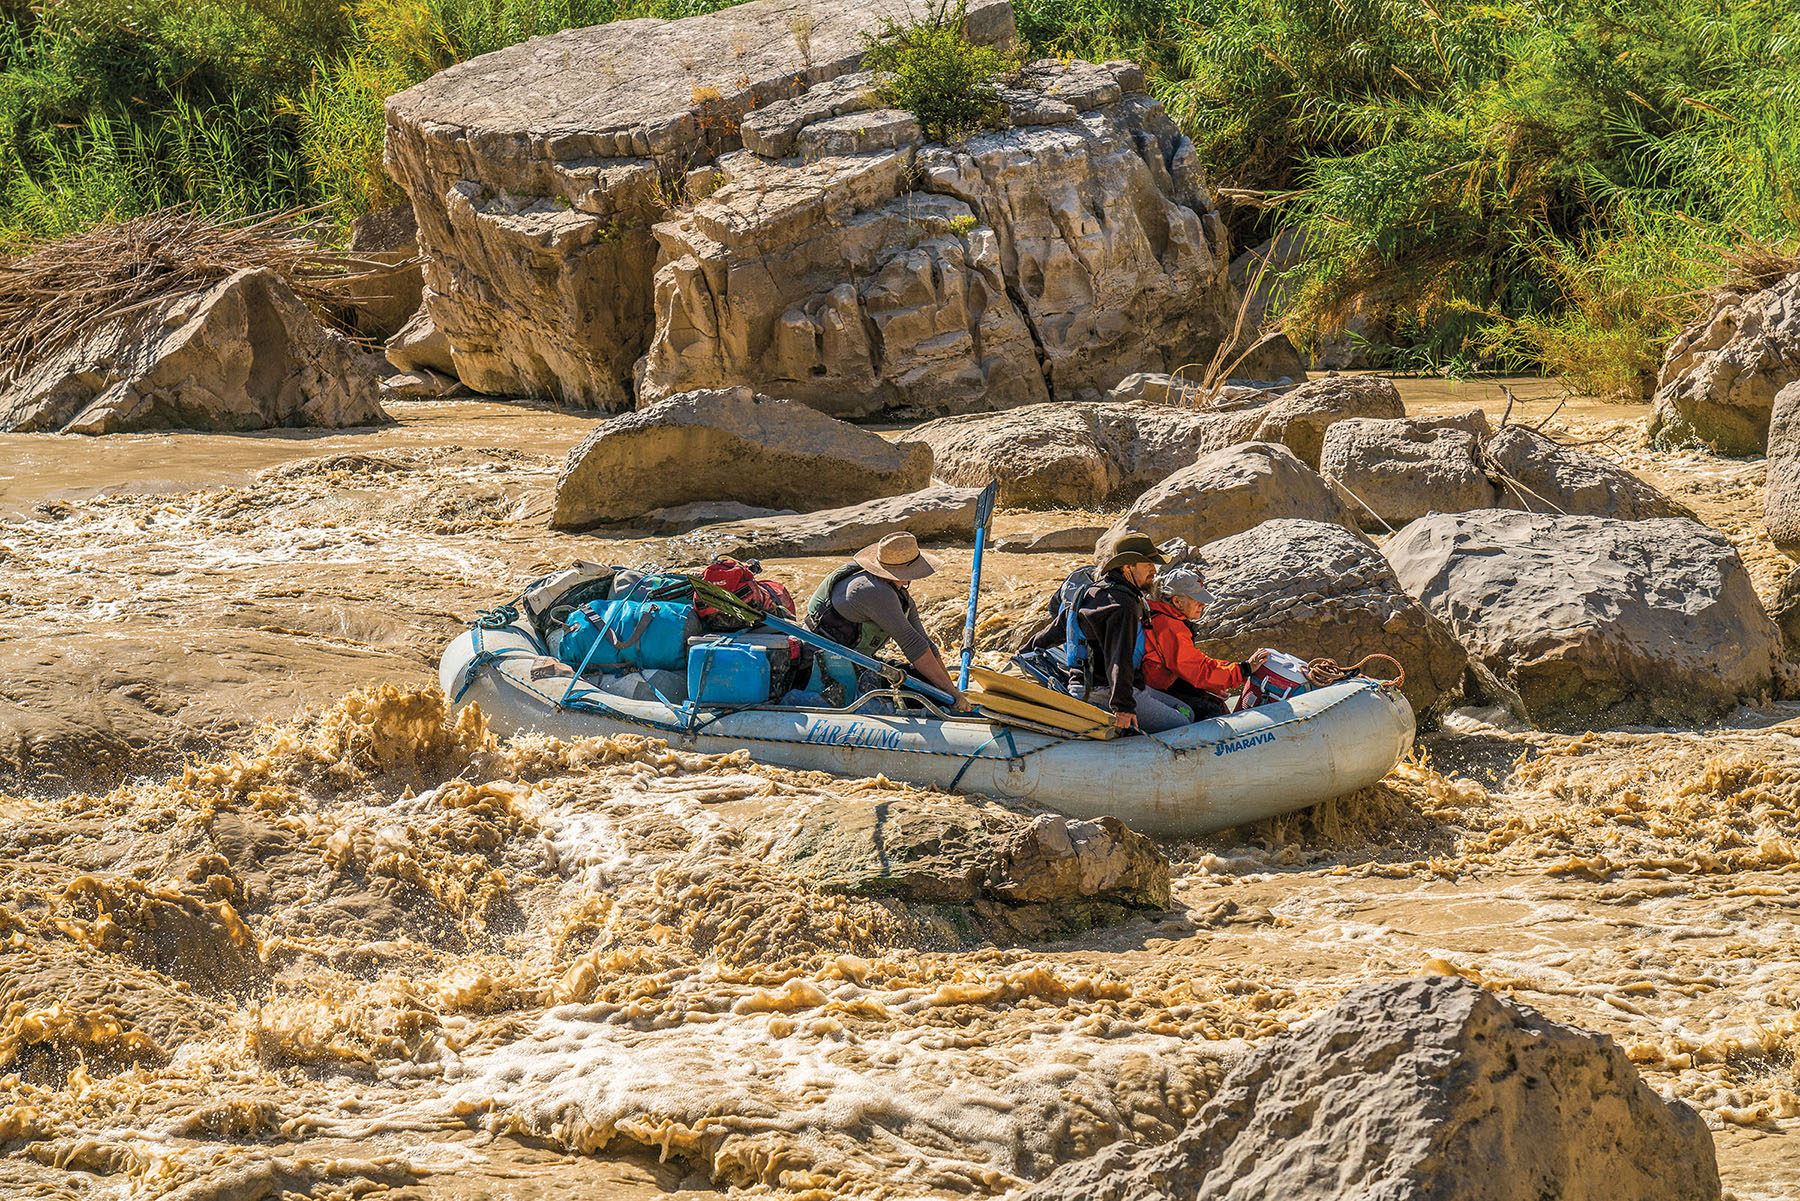 A raft navigates between rocks and rapids on the Rio Grande